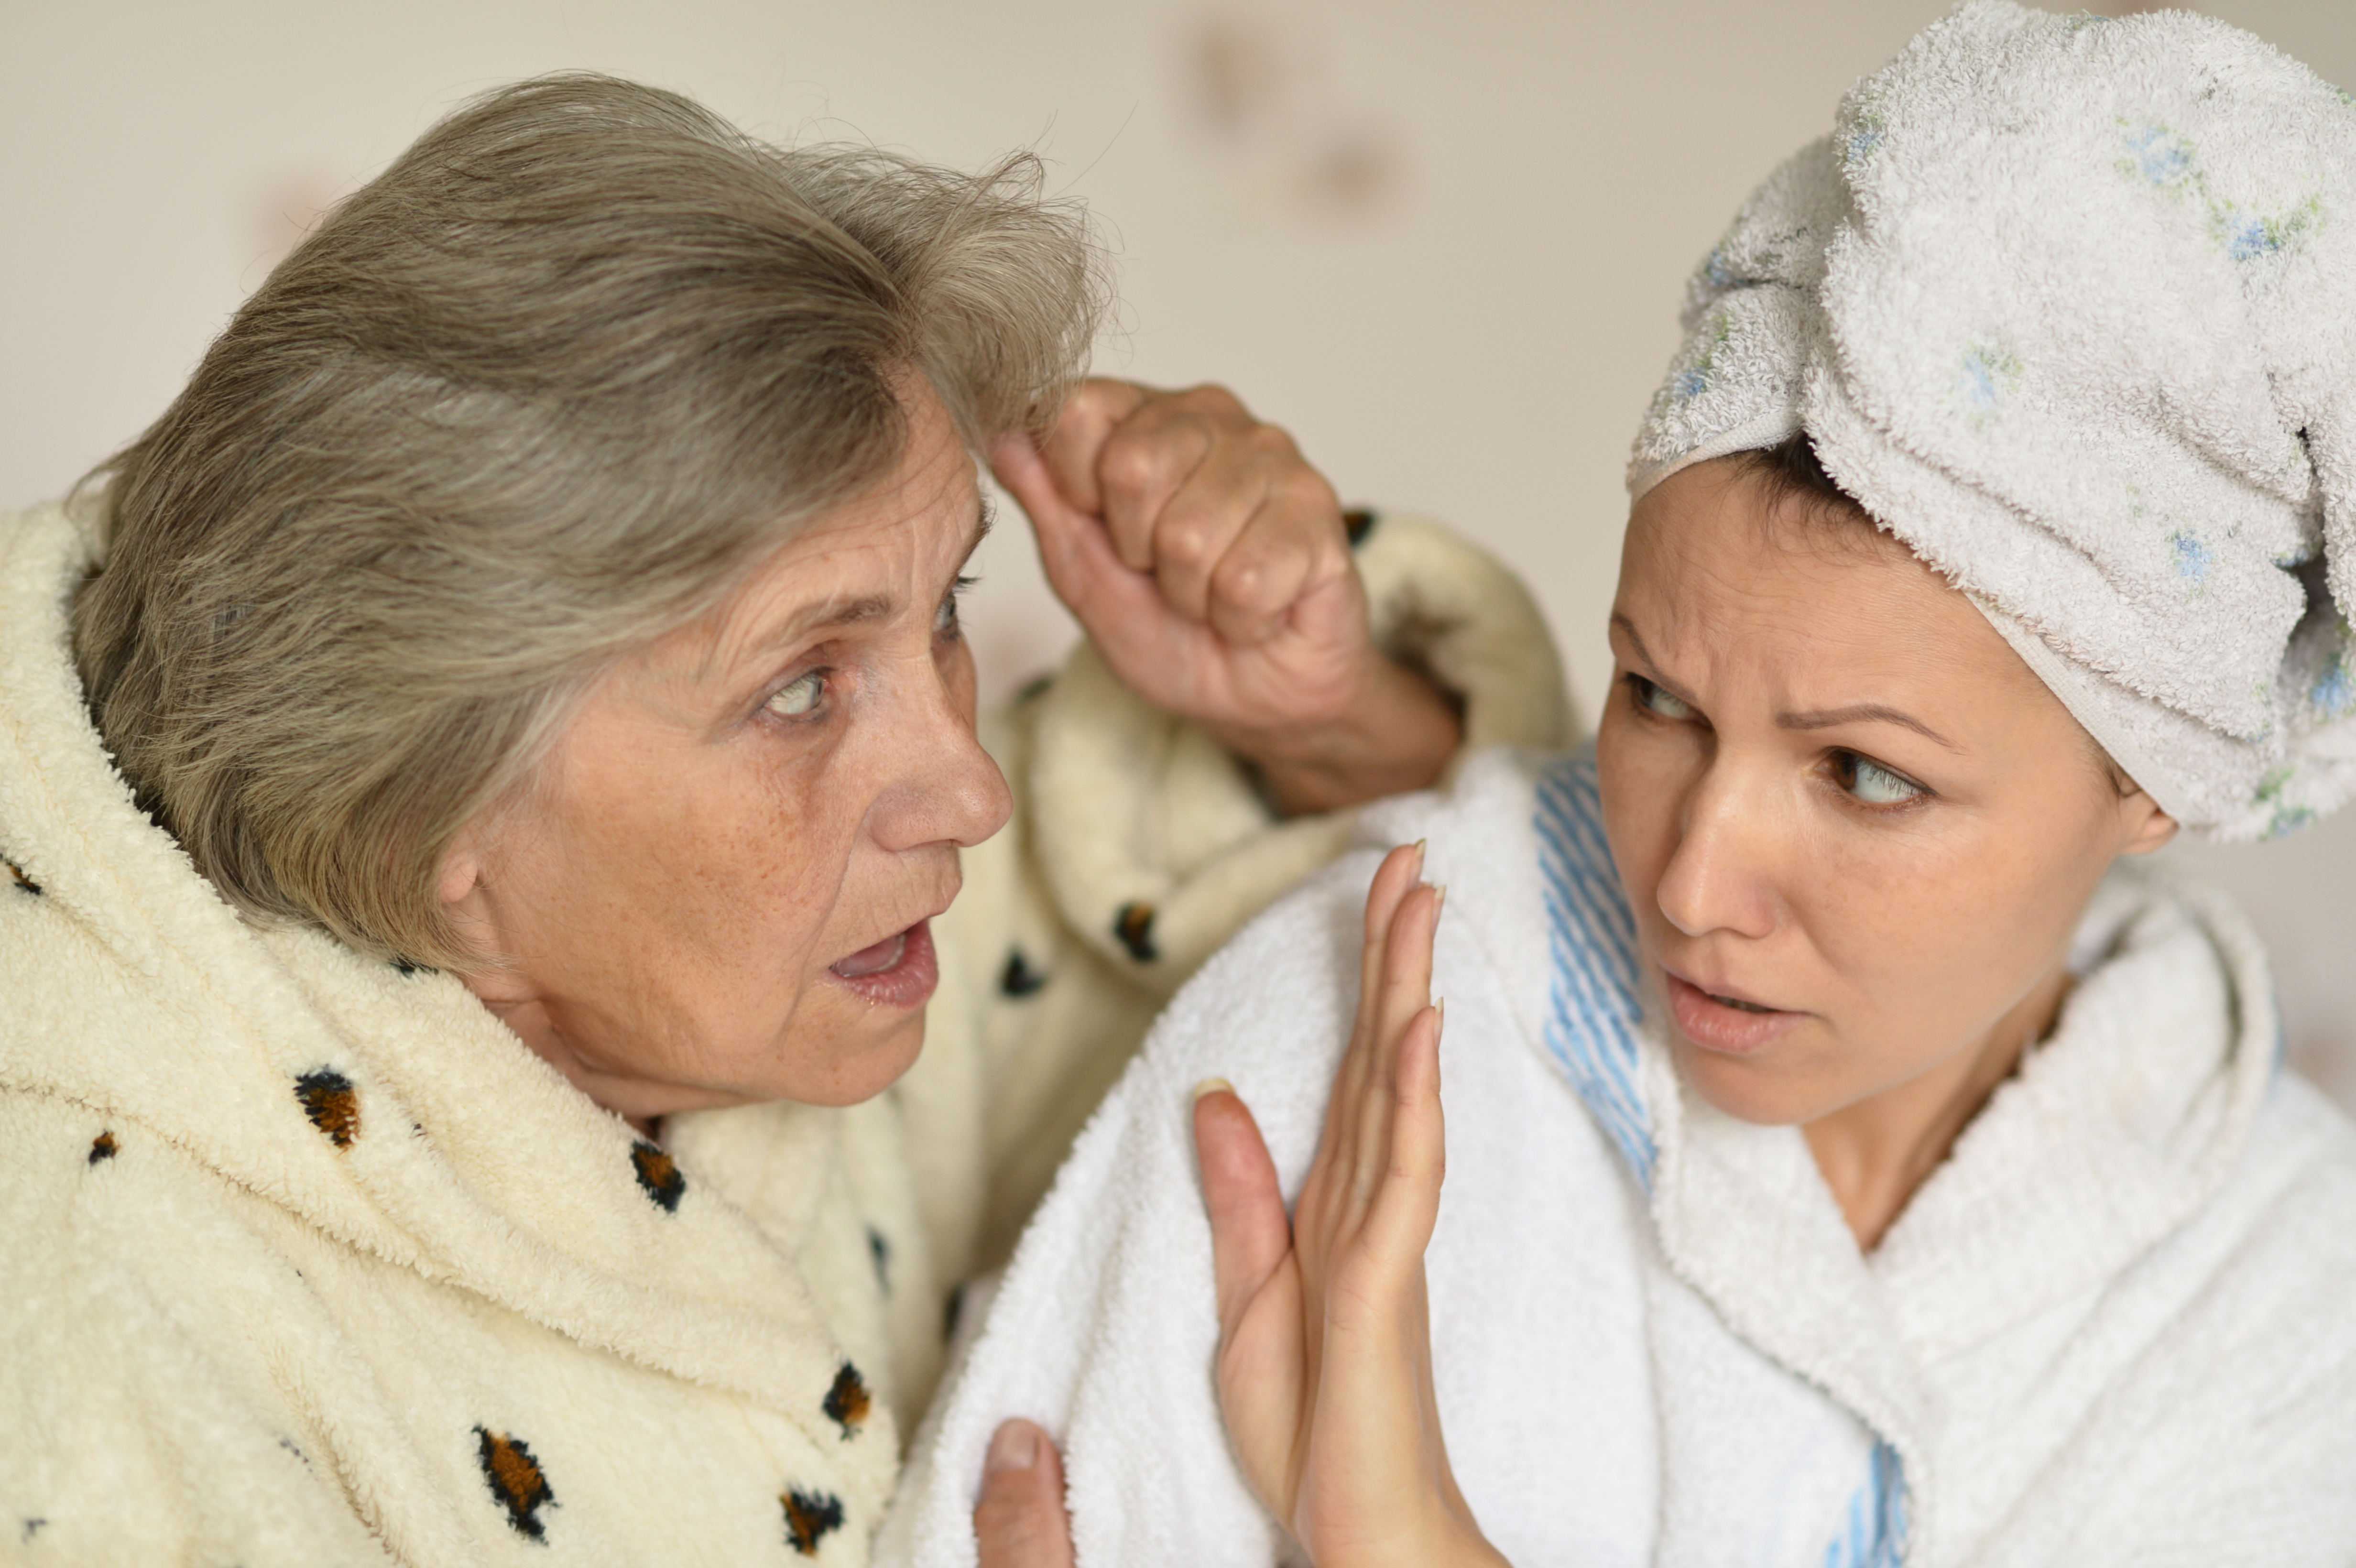 An older woman talking angrily to a young woman | Source: Shutterstock